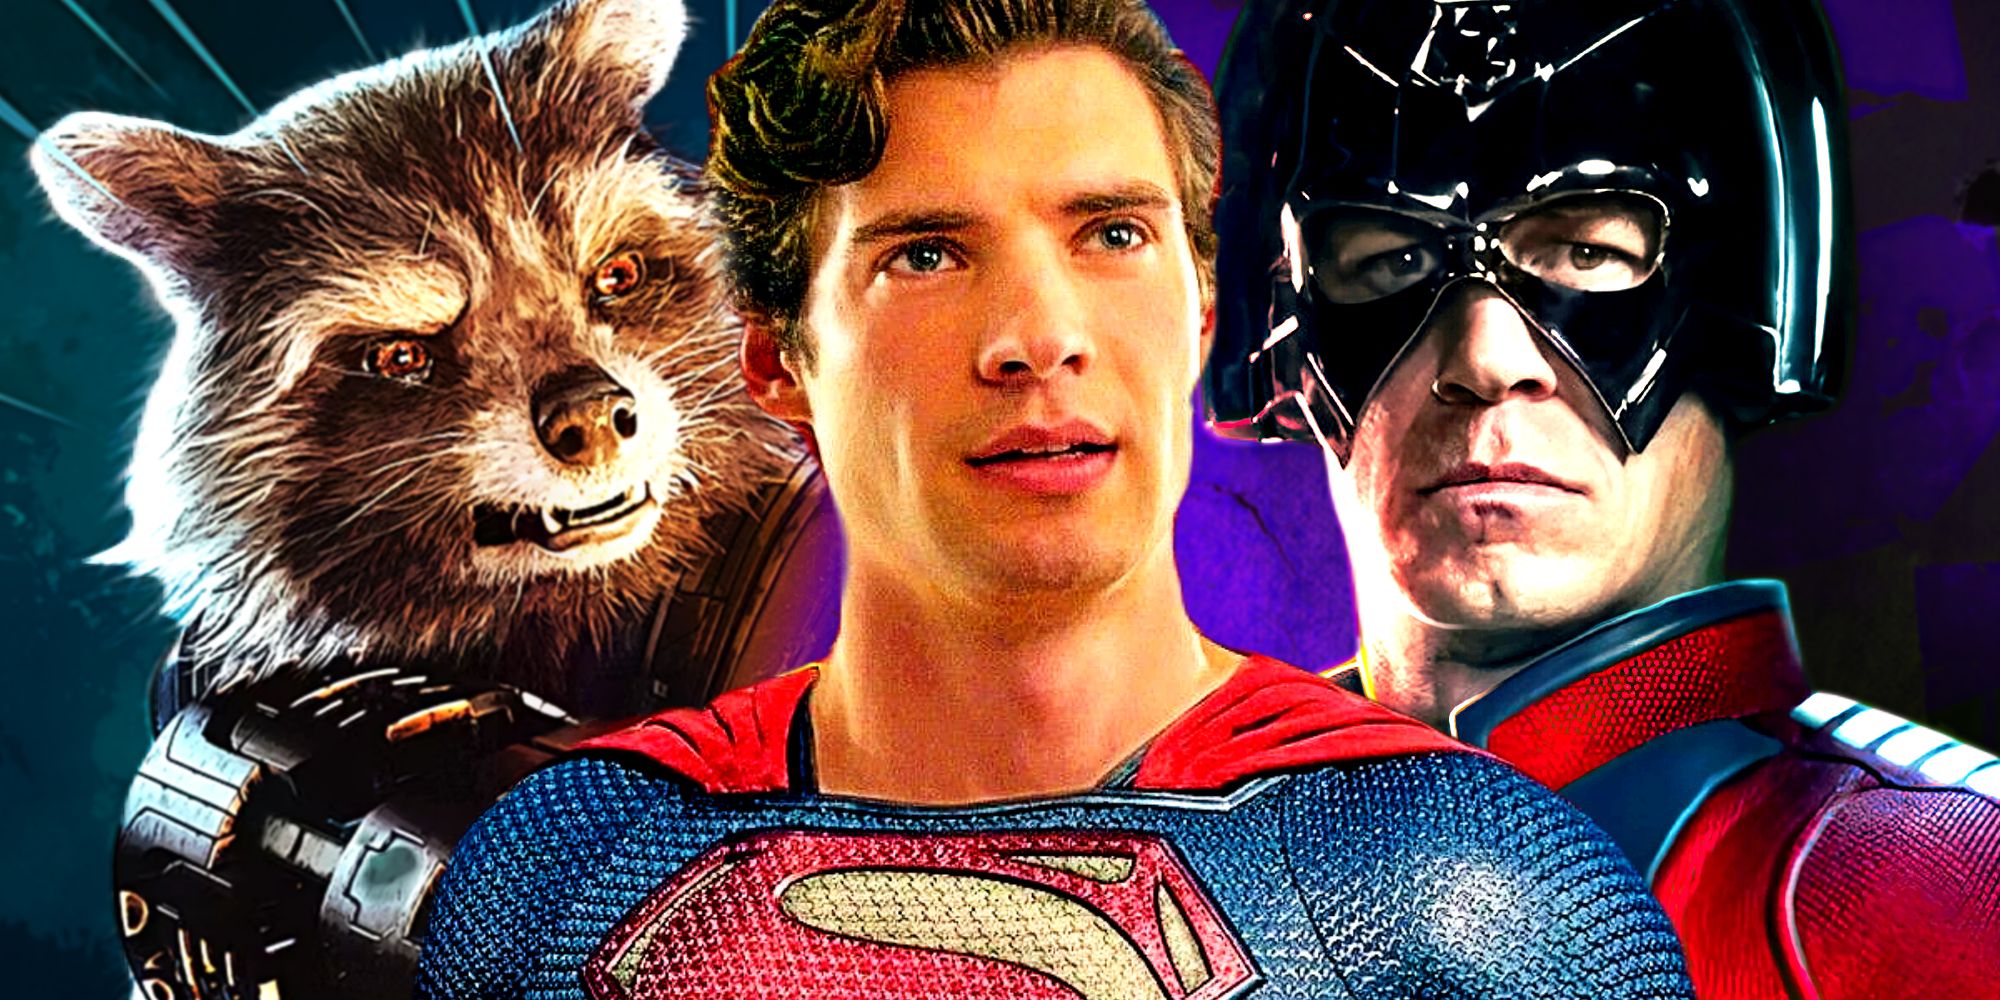 David Corenswet's Superman with John Cena's Peacemaker and Bradley Cooper's Rocket Raccoon in James Gunn's Marvel and DC Superhero Projects